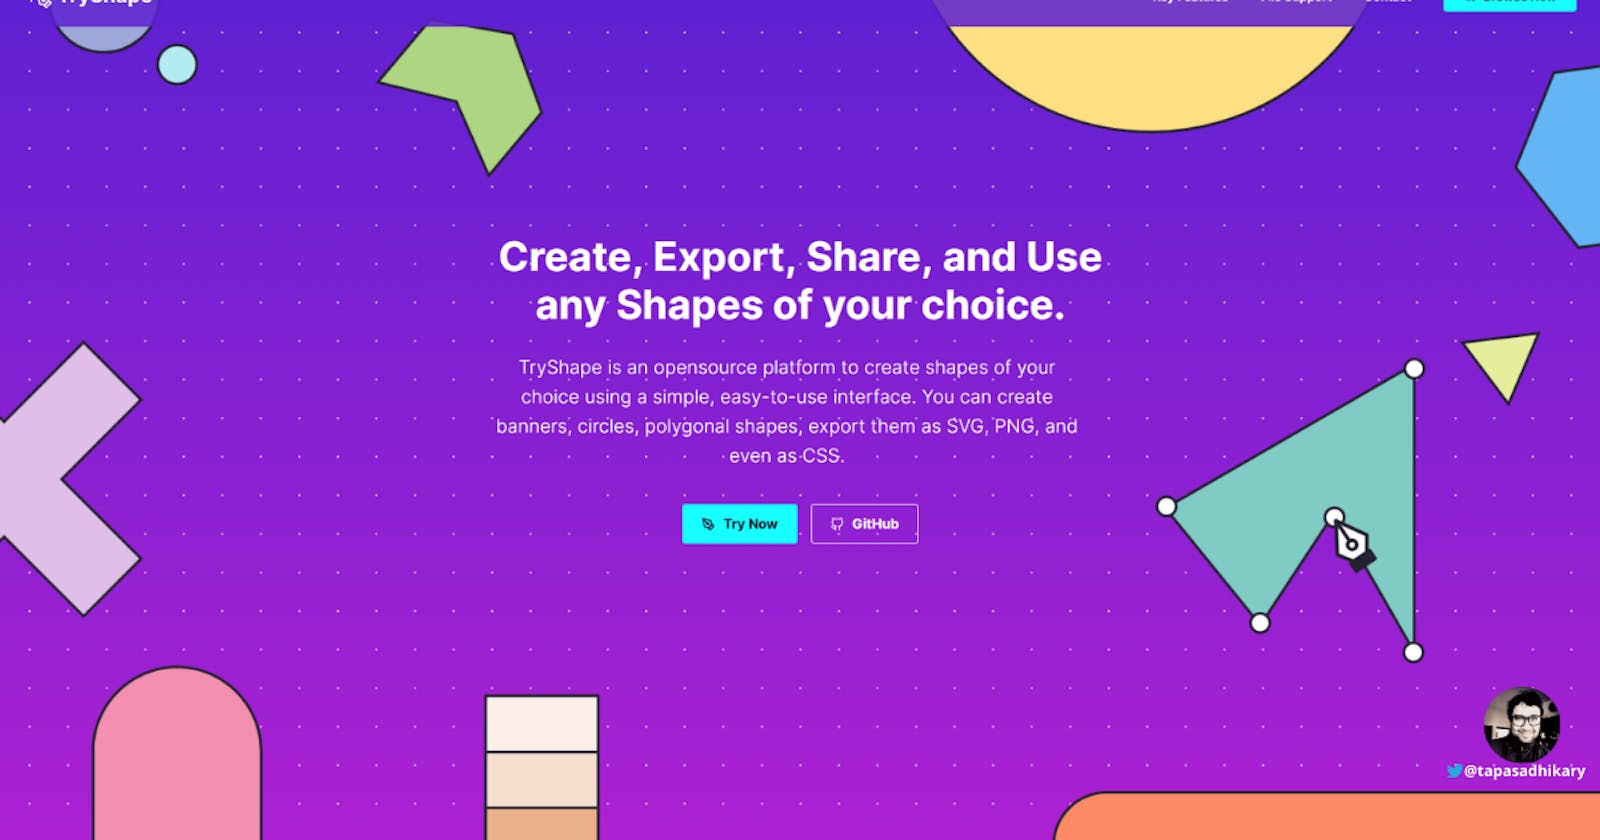 Introducing TryShape: Give Your Creativity a Shape